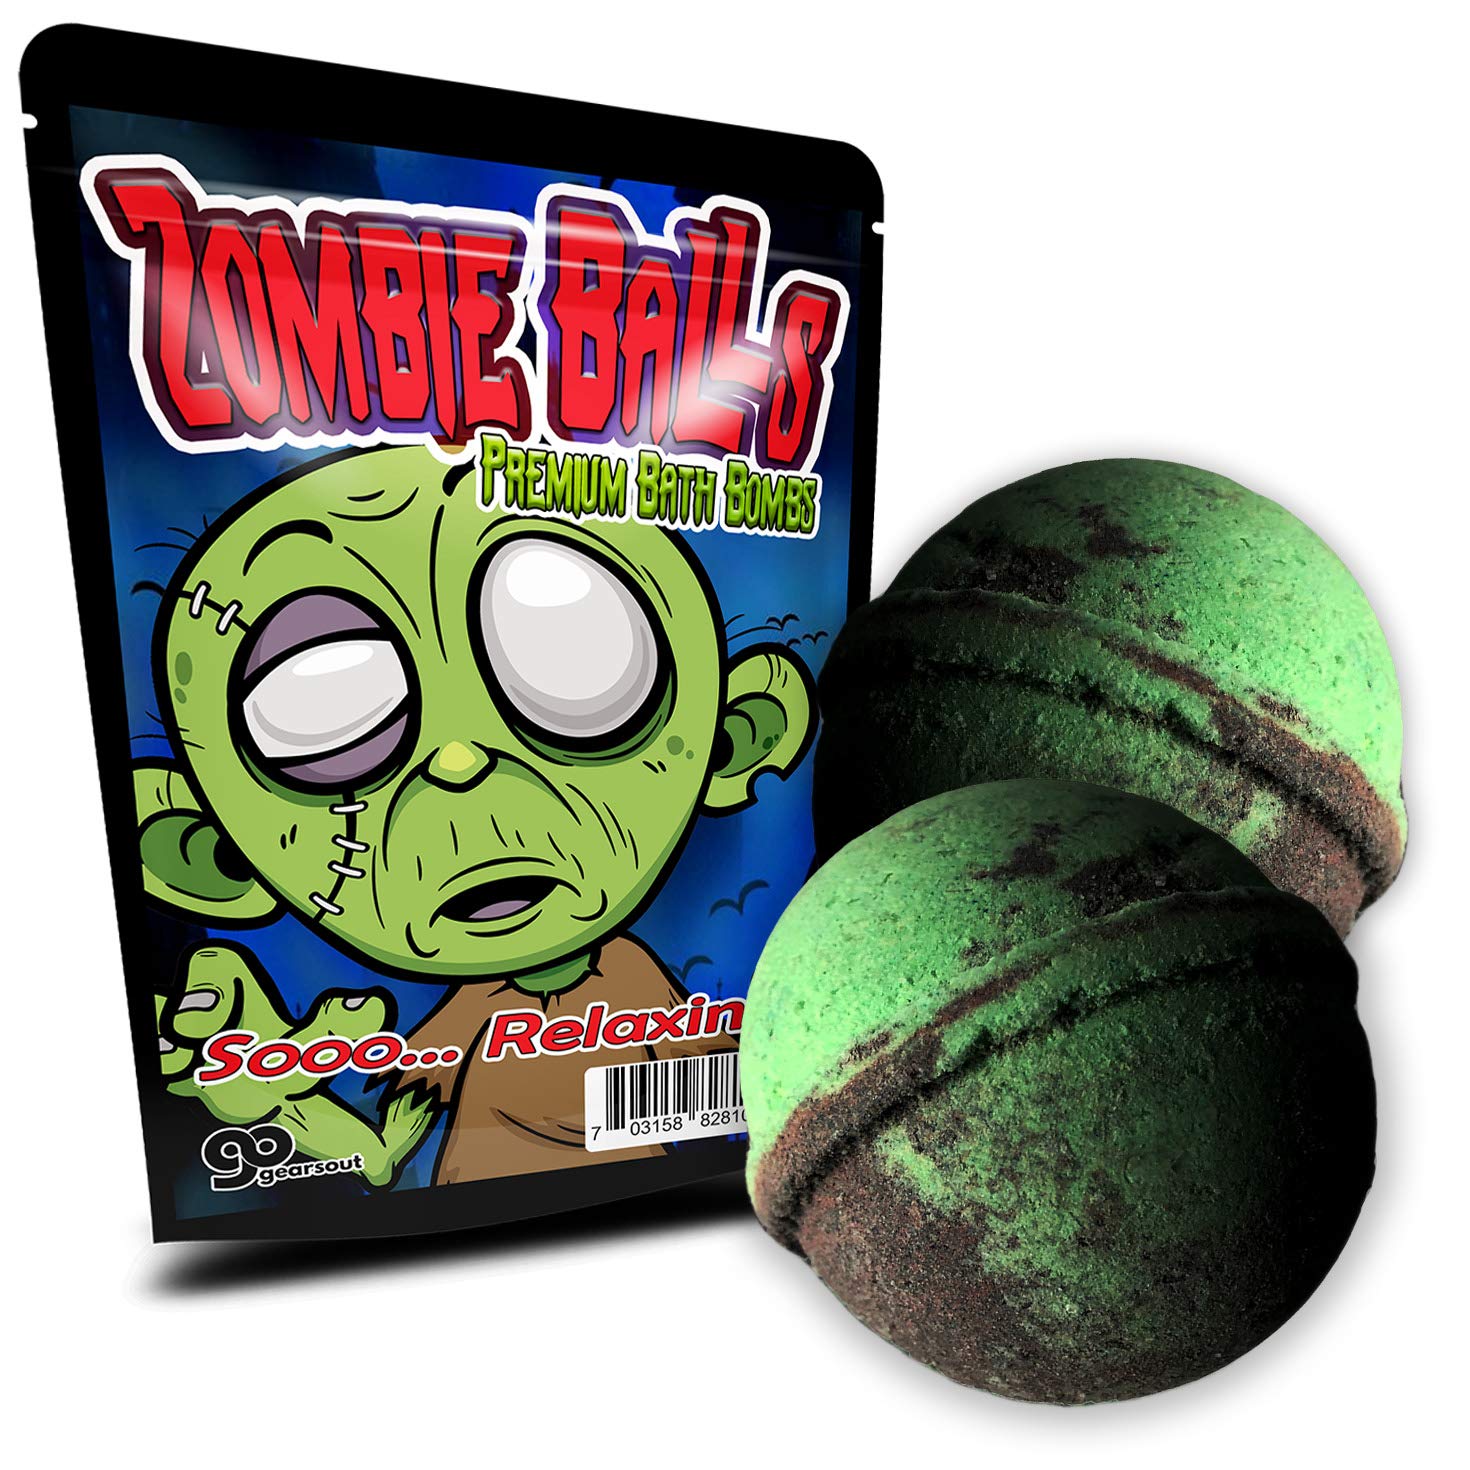 Zombie Balls Bath Bombs - Fun Zombie Design - Cool Bath Bombs for Teens - Cute XL Bath Fizzers, Green and Black, Handcrafted in The USA